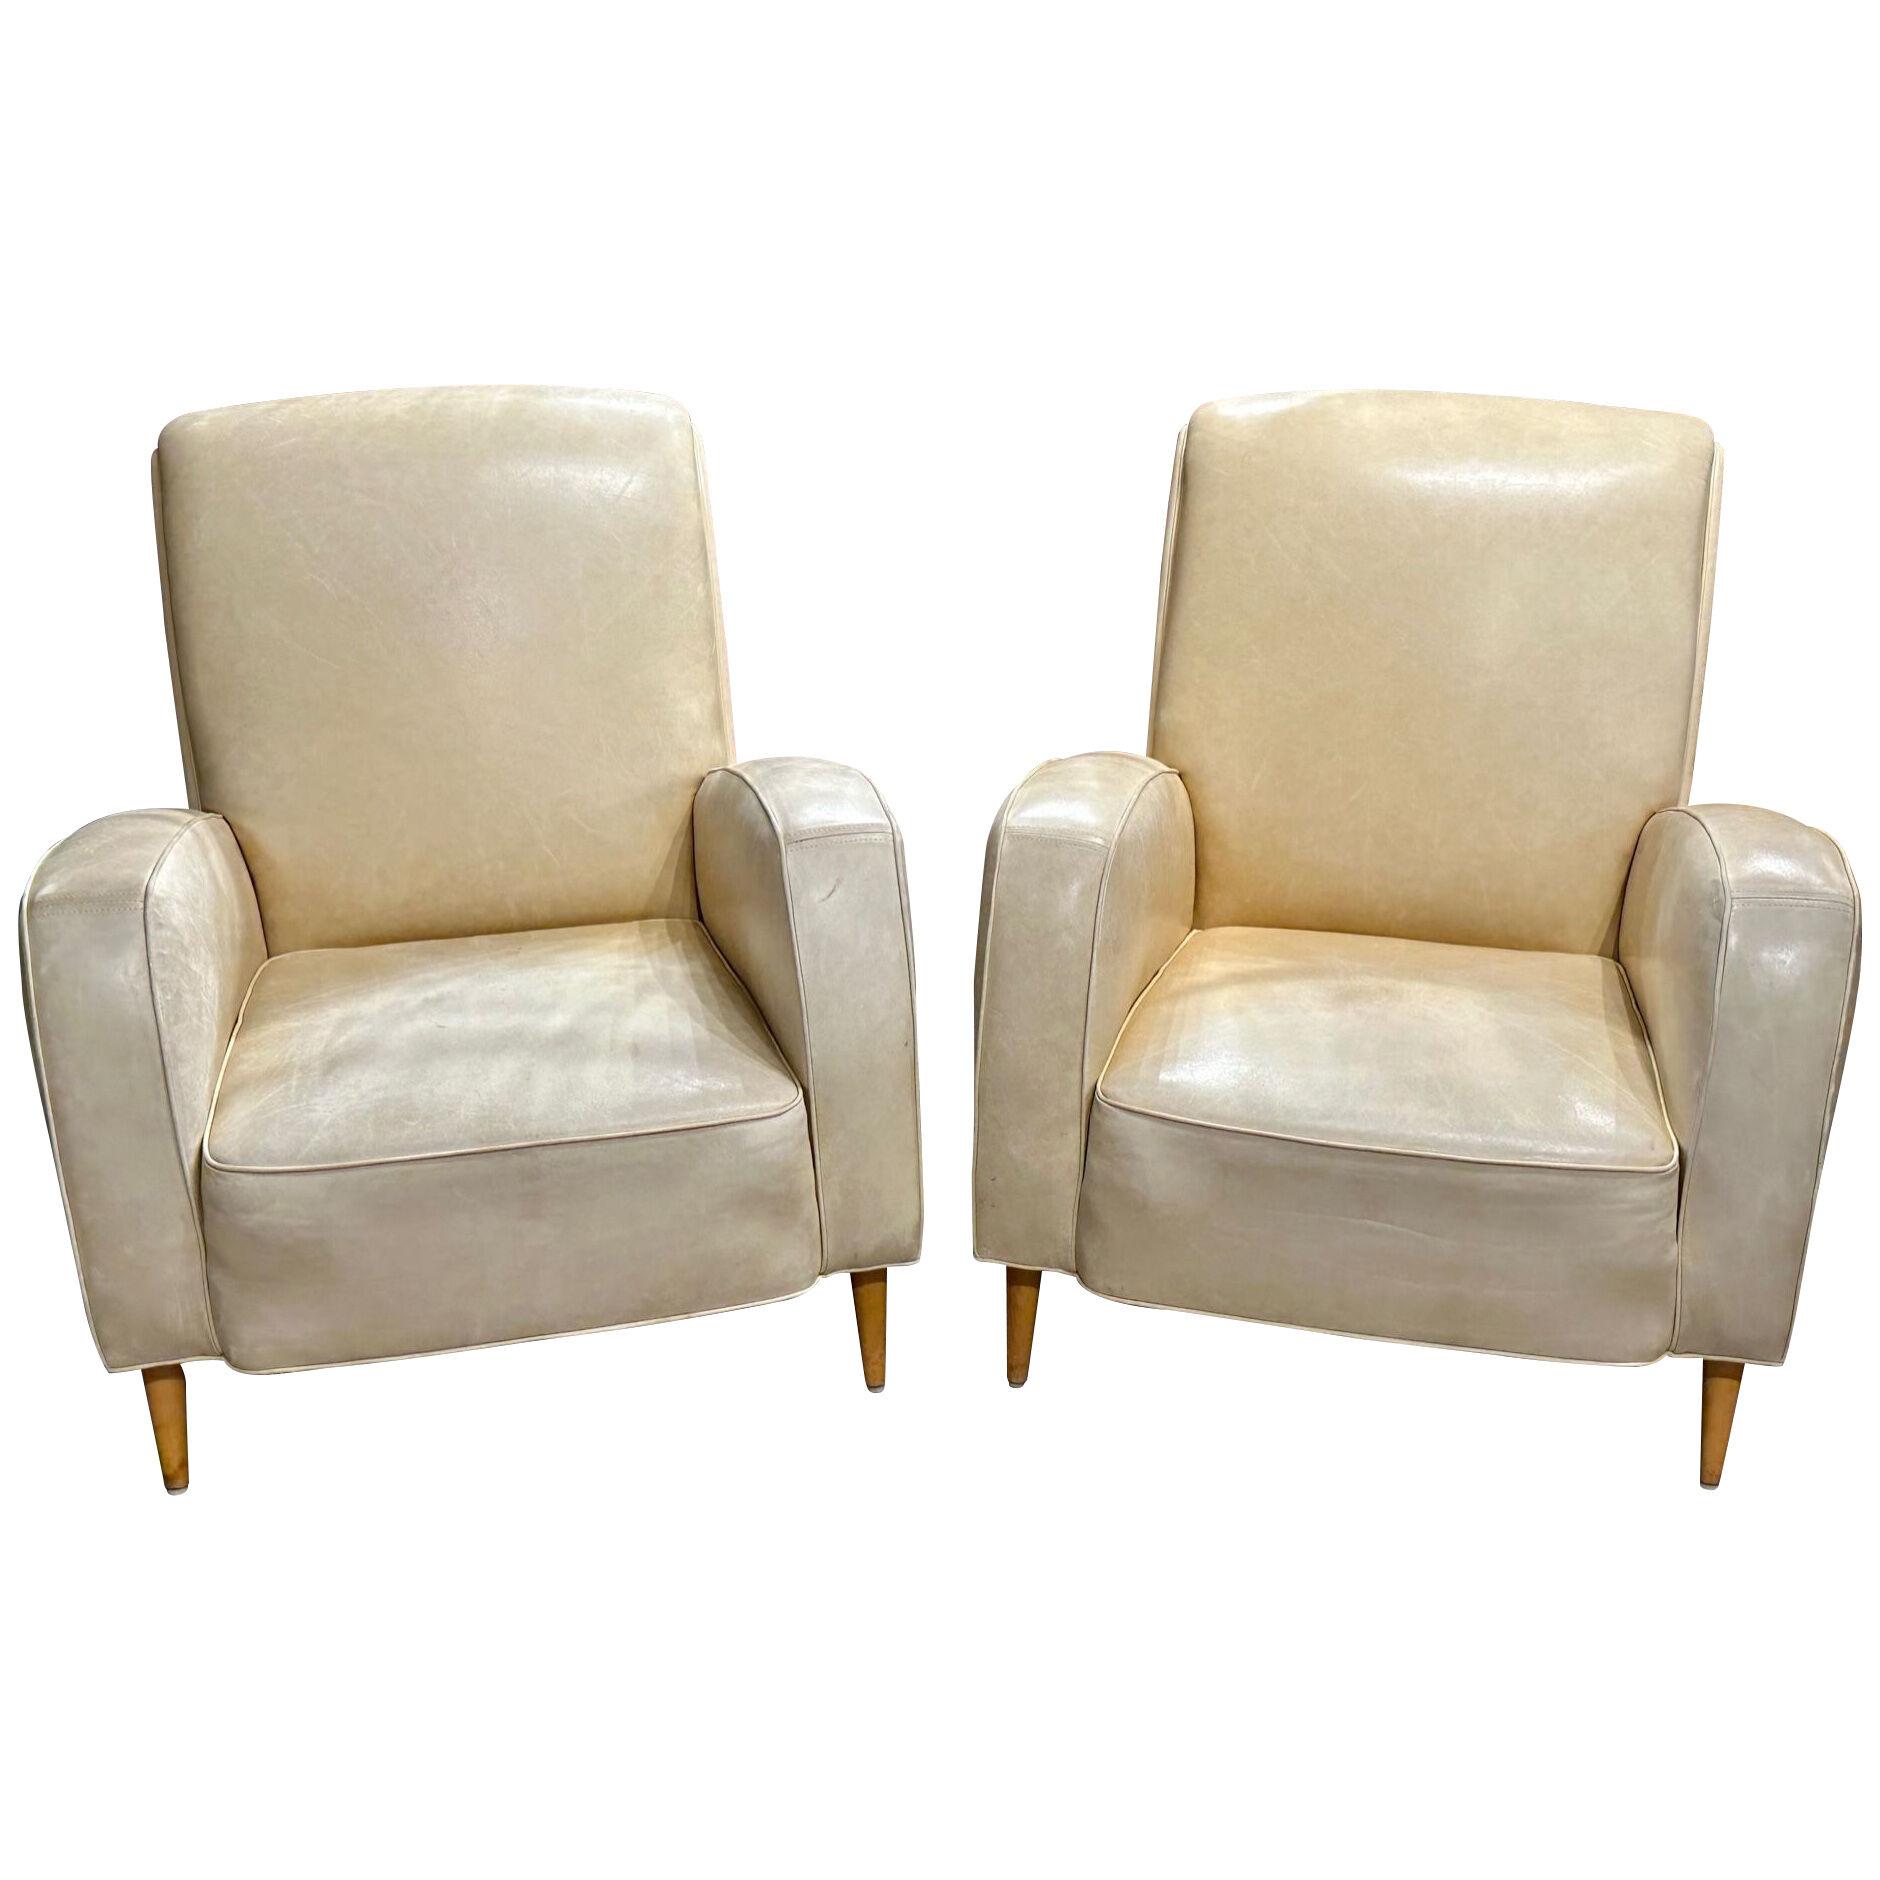 Pair of Italian Mid-Century Leather Club Chairs